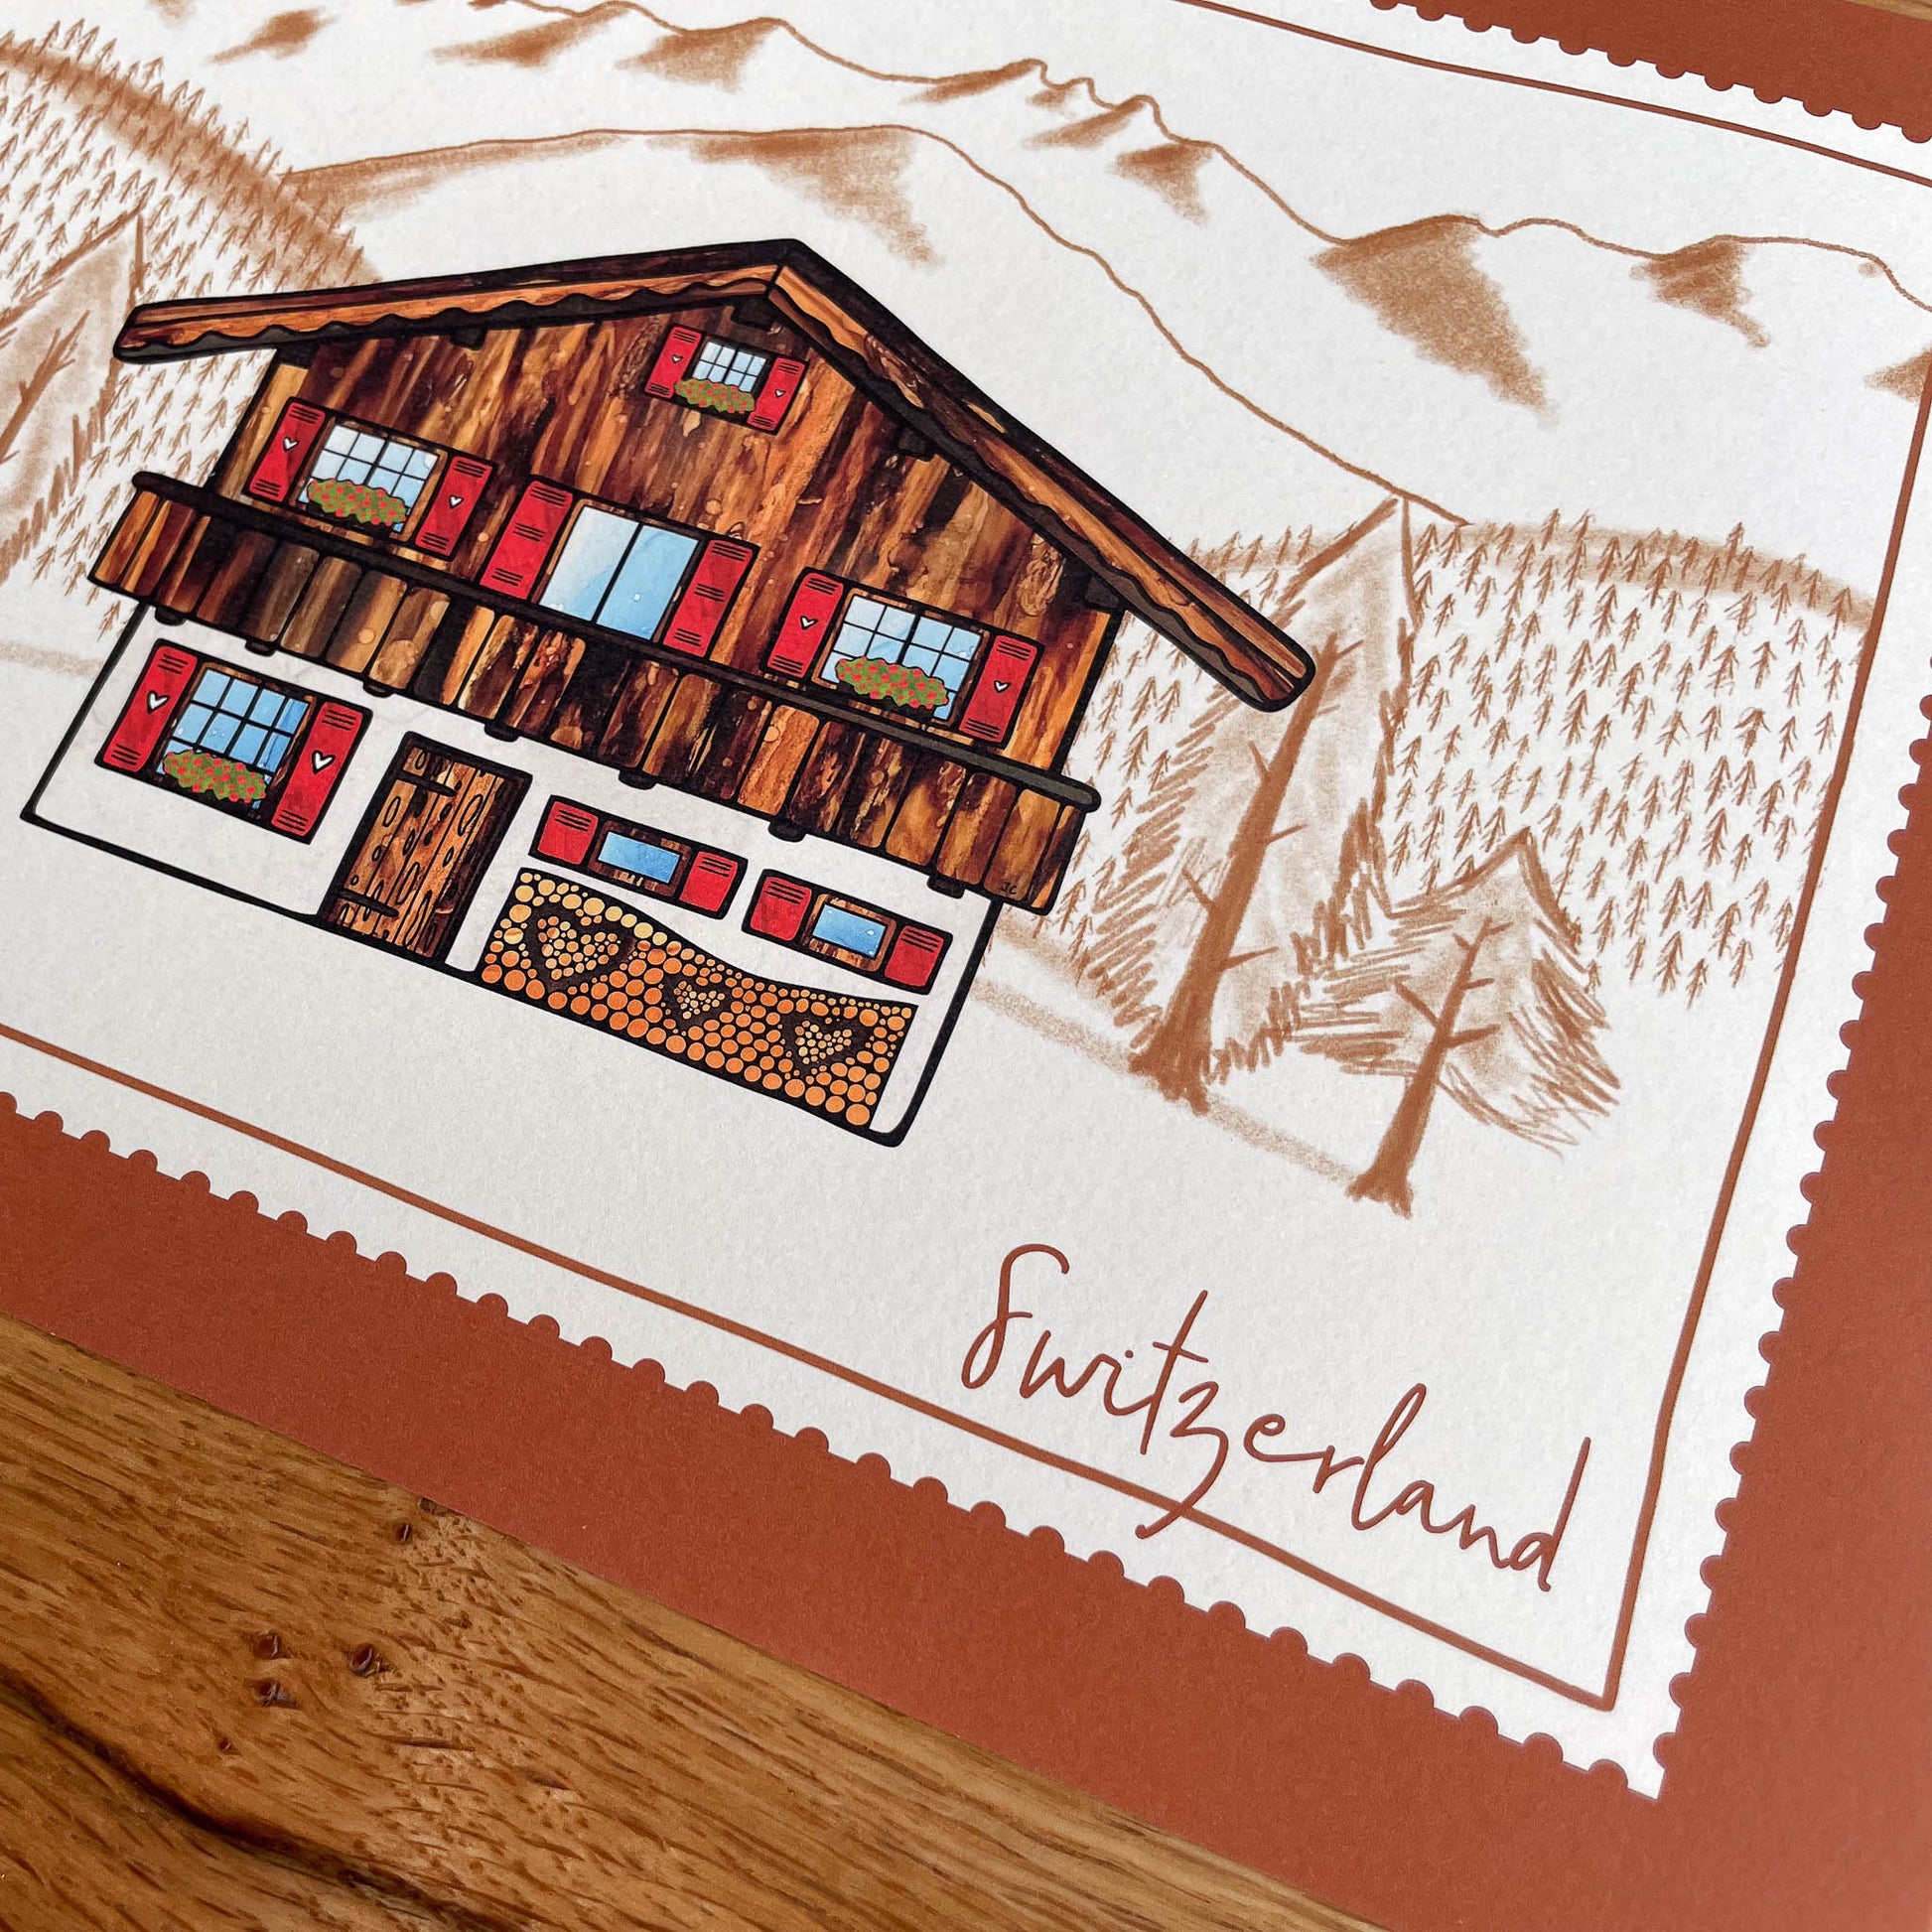 Hiking enthusiasts will love this Chalet Dreams print, capturing the magic of the Swiss Alps.